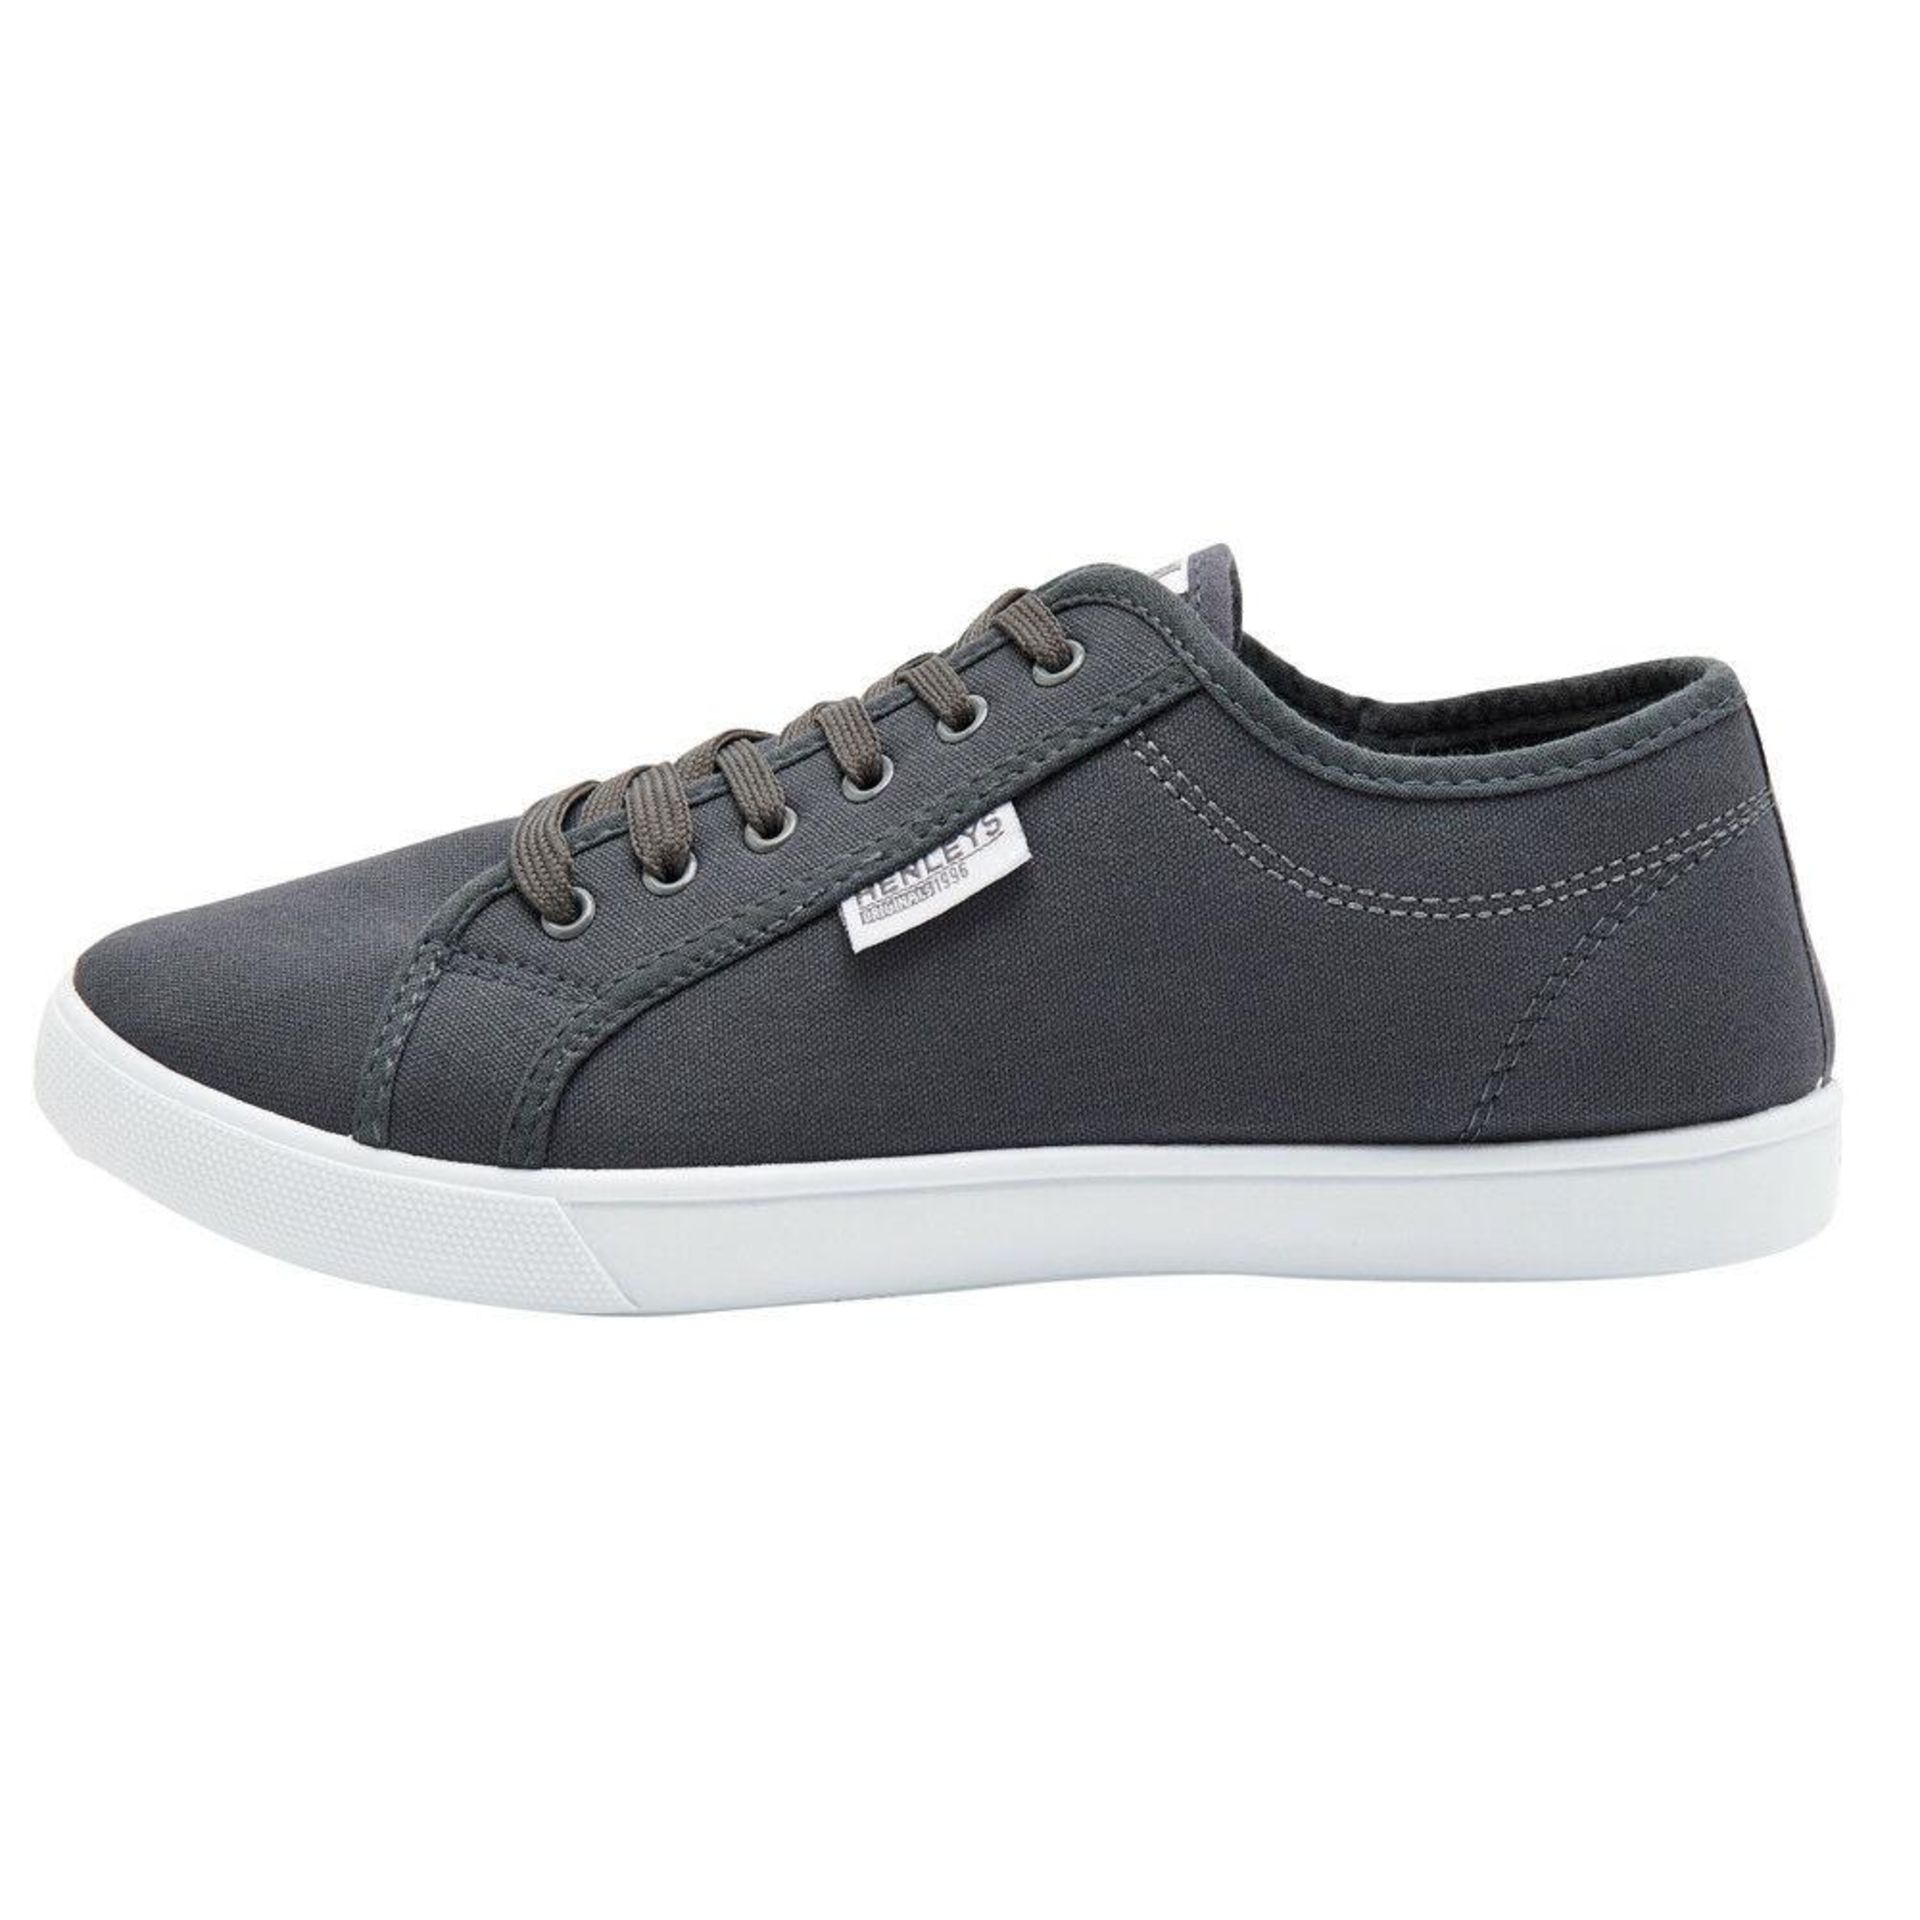 10 X BRAND NEW HENLEYS ORIGINAL CANVAS TRAINERS IN CHARCOAL GREY - ALL IN SIZE UK 10 - RRP £ 24.99 - - Image 3 of 4